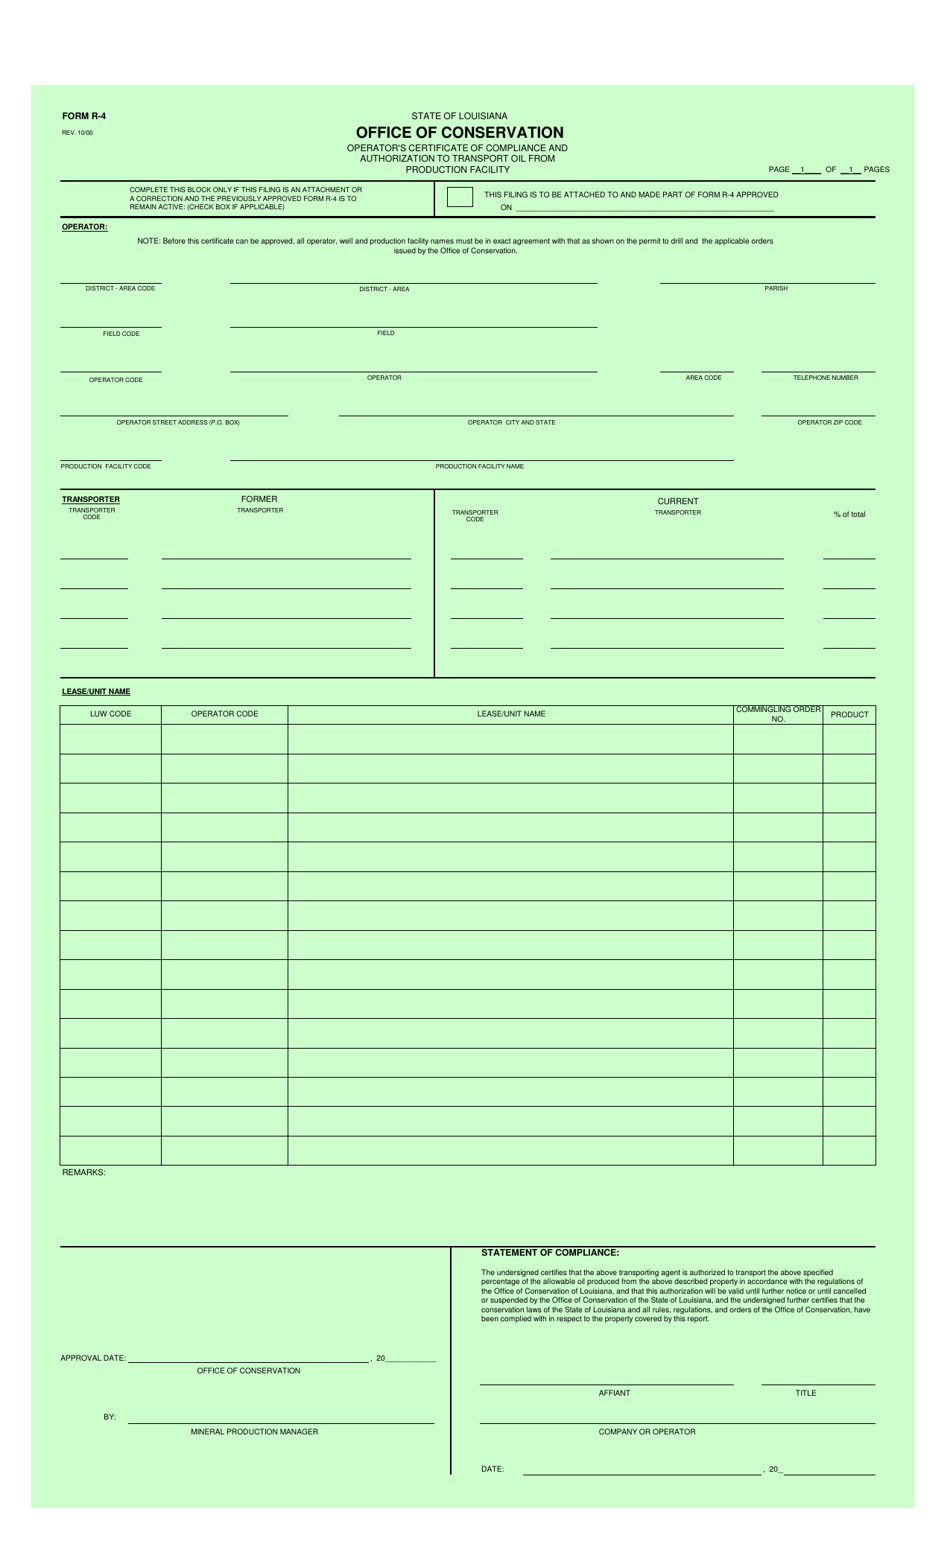 Form R-4 Operators Certificate of Compliance and Authorization to Transport Oil From Production Facility - Louisiana, Page 1